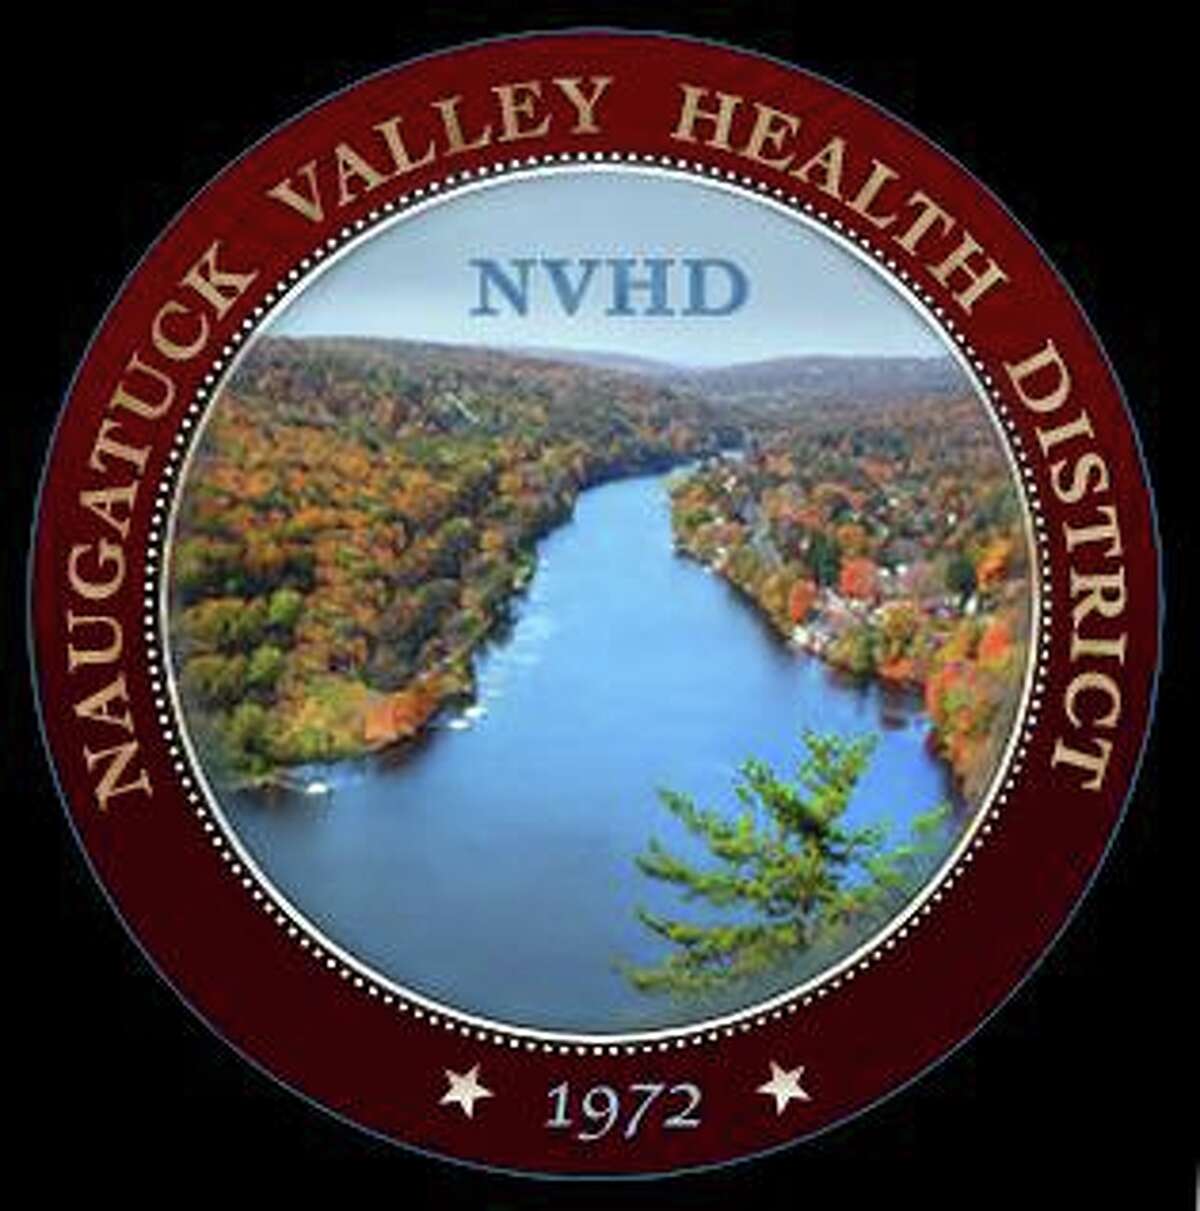 The Naugatuck Valley Health District offered the latest updates on the coronavirus and its impacts on the area.